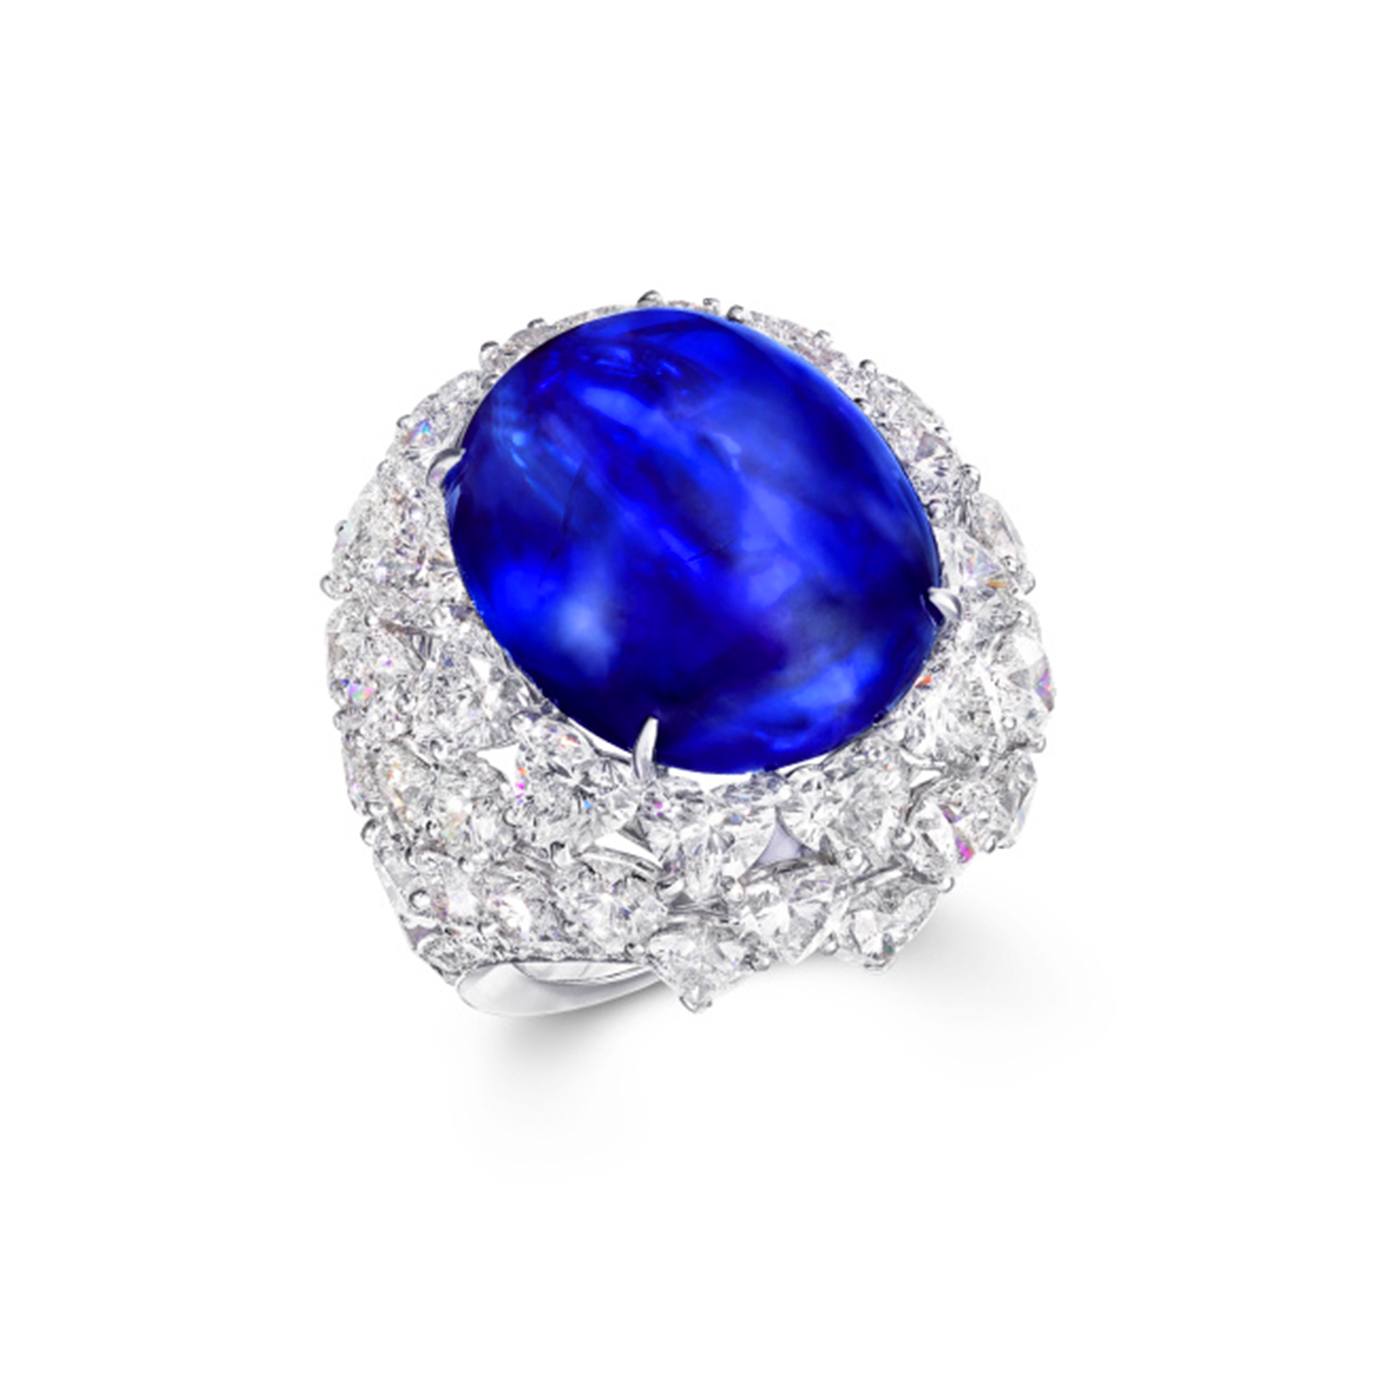 Sapphire Cabochon and Diamond Ring.